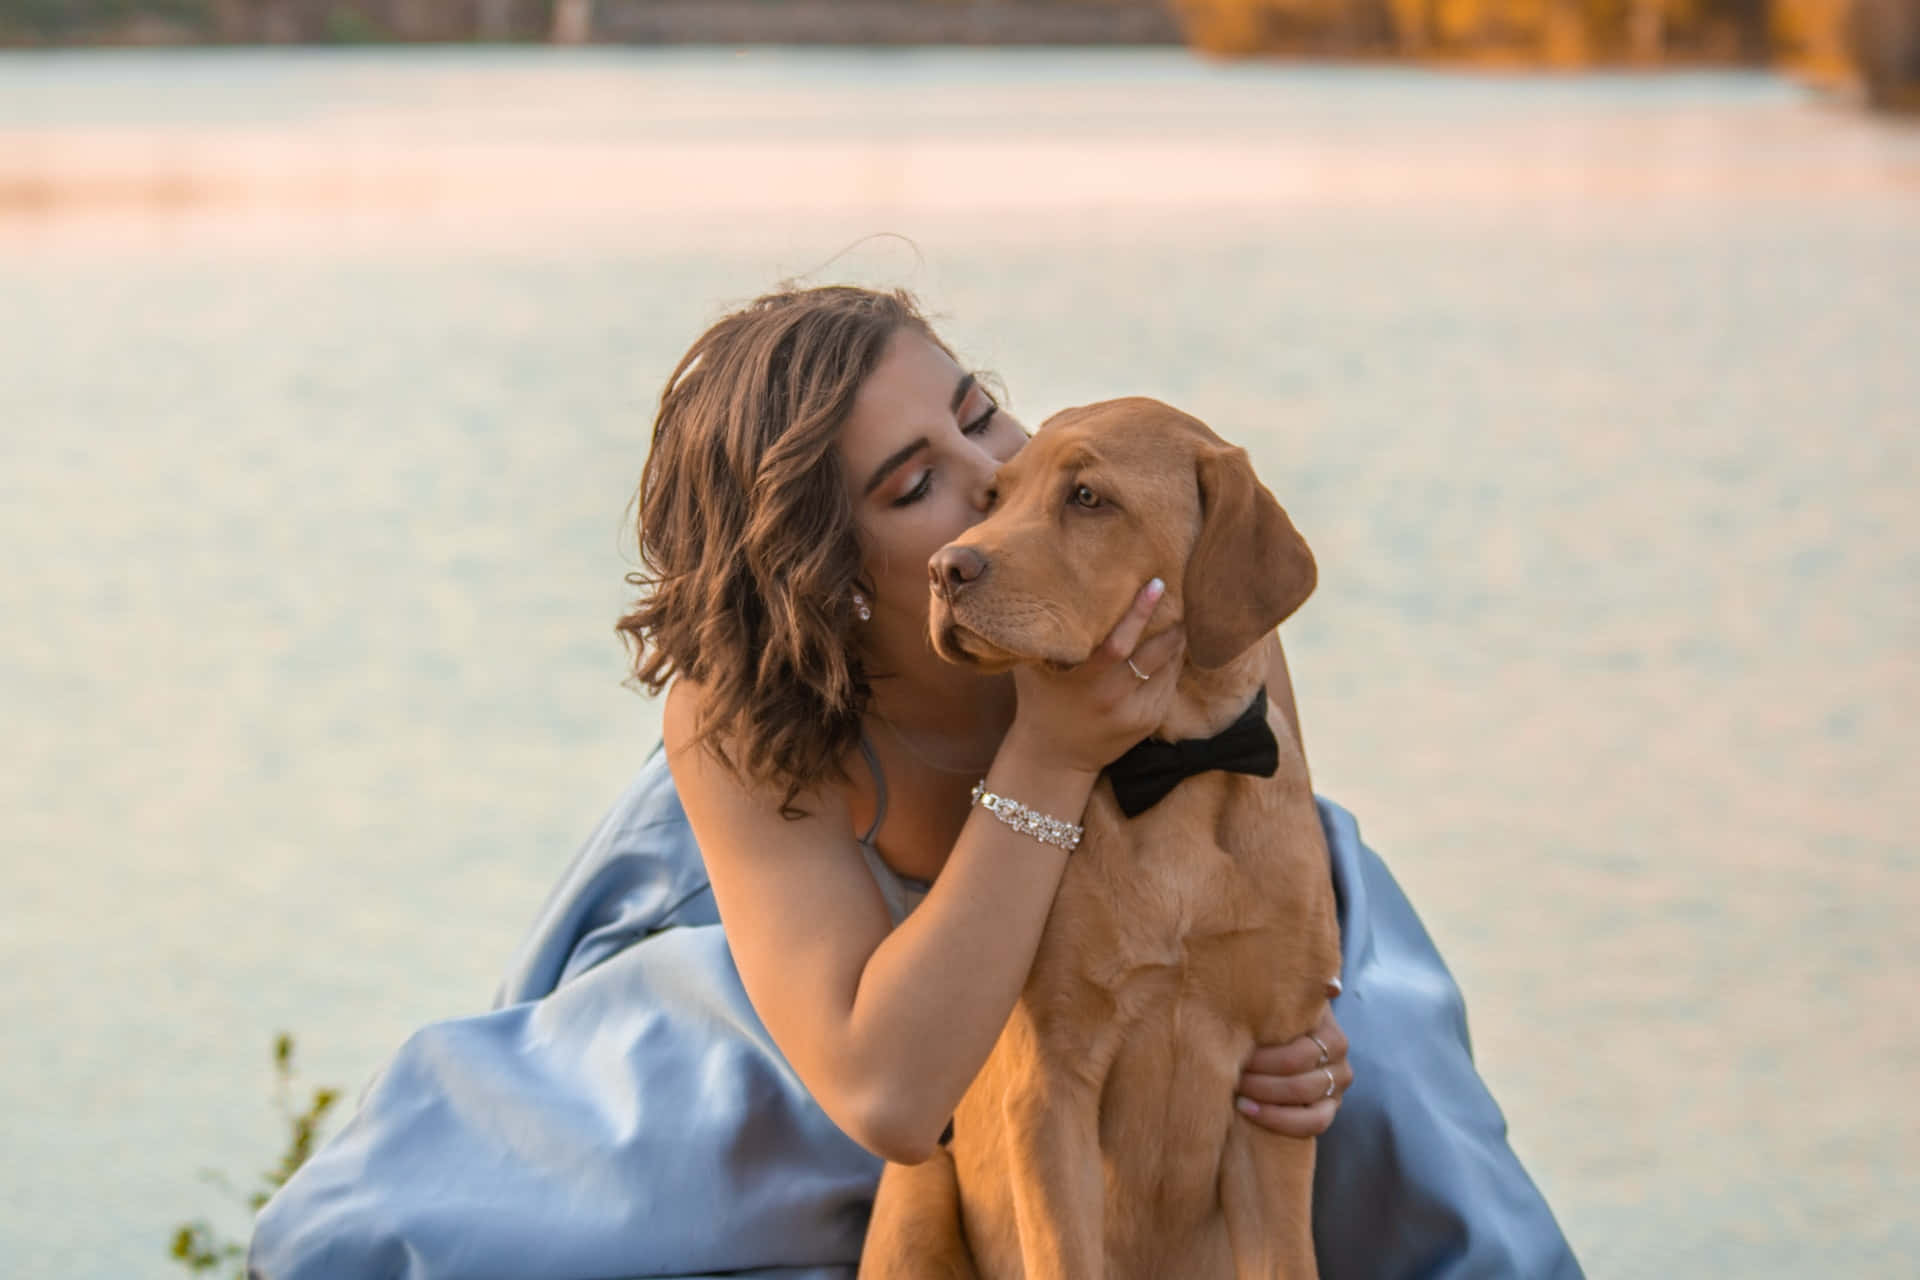 Caption: "a Loving Moment Between A Woman And Her Dog" Wallpaper